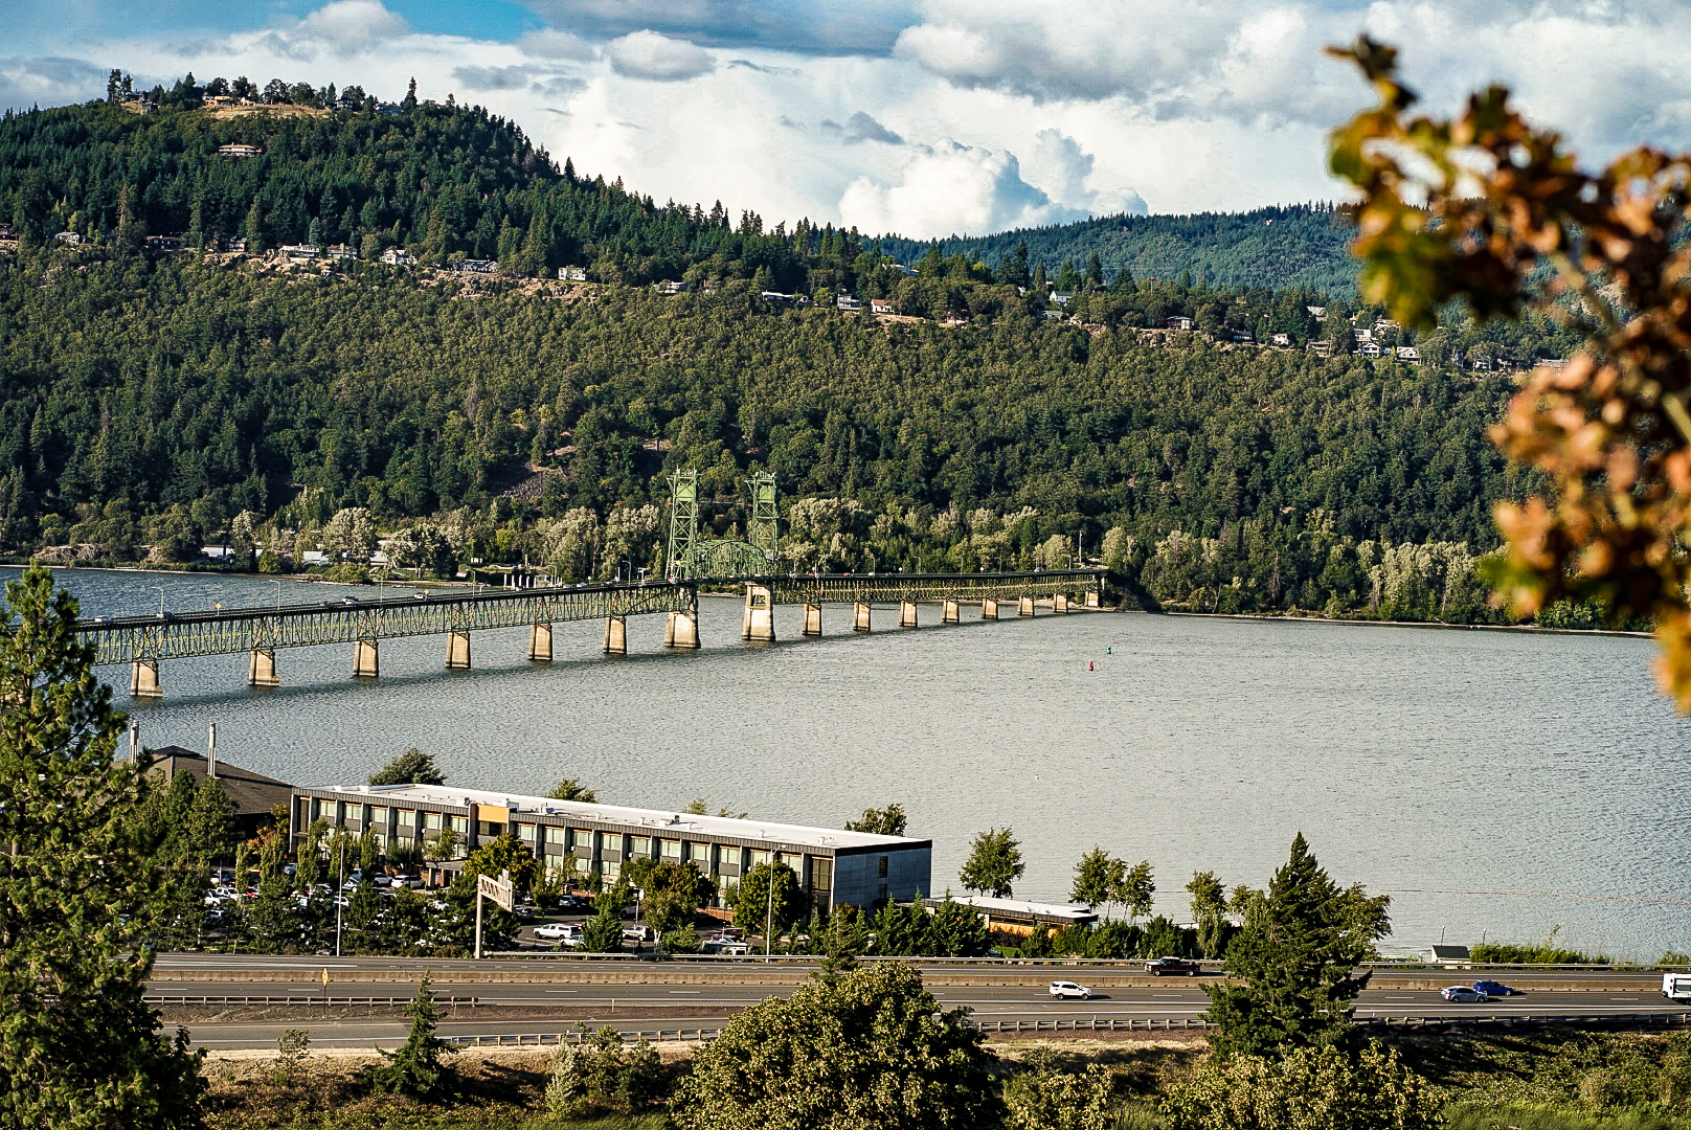 A landscape view of the Columbia River and the Hood River Bridge